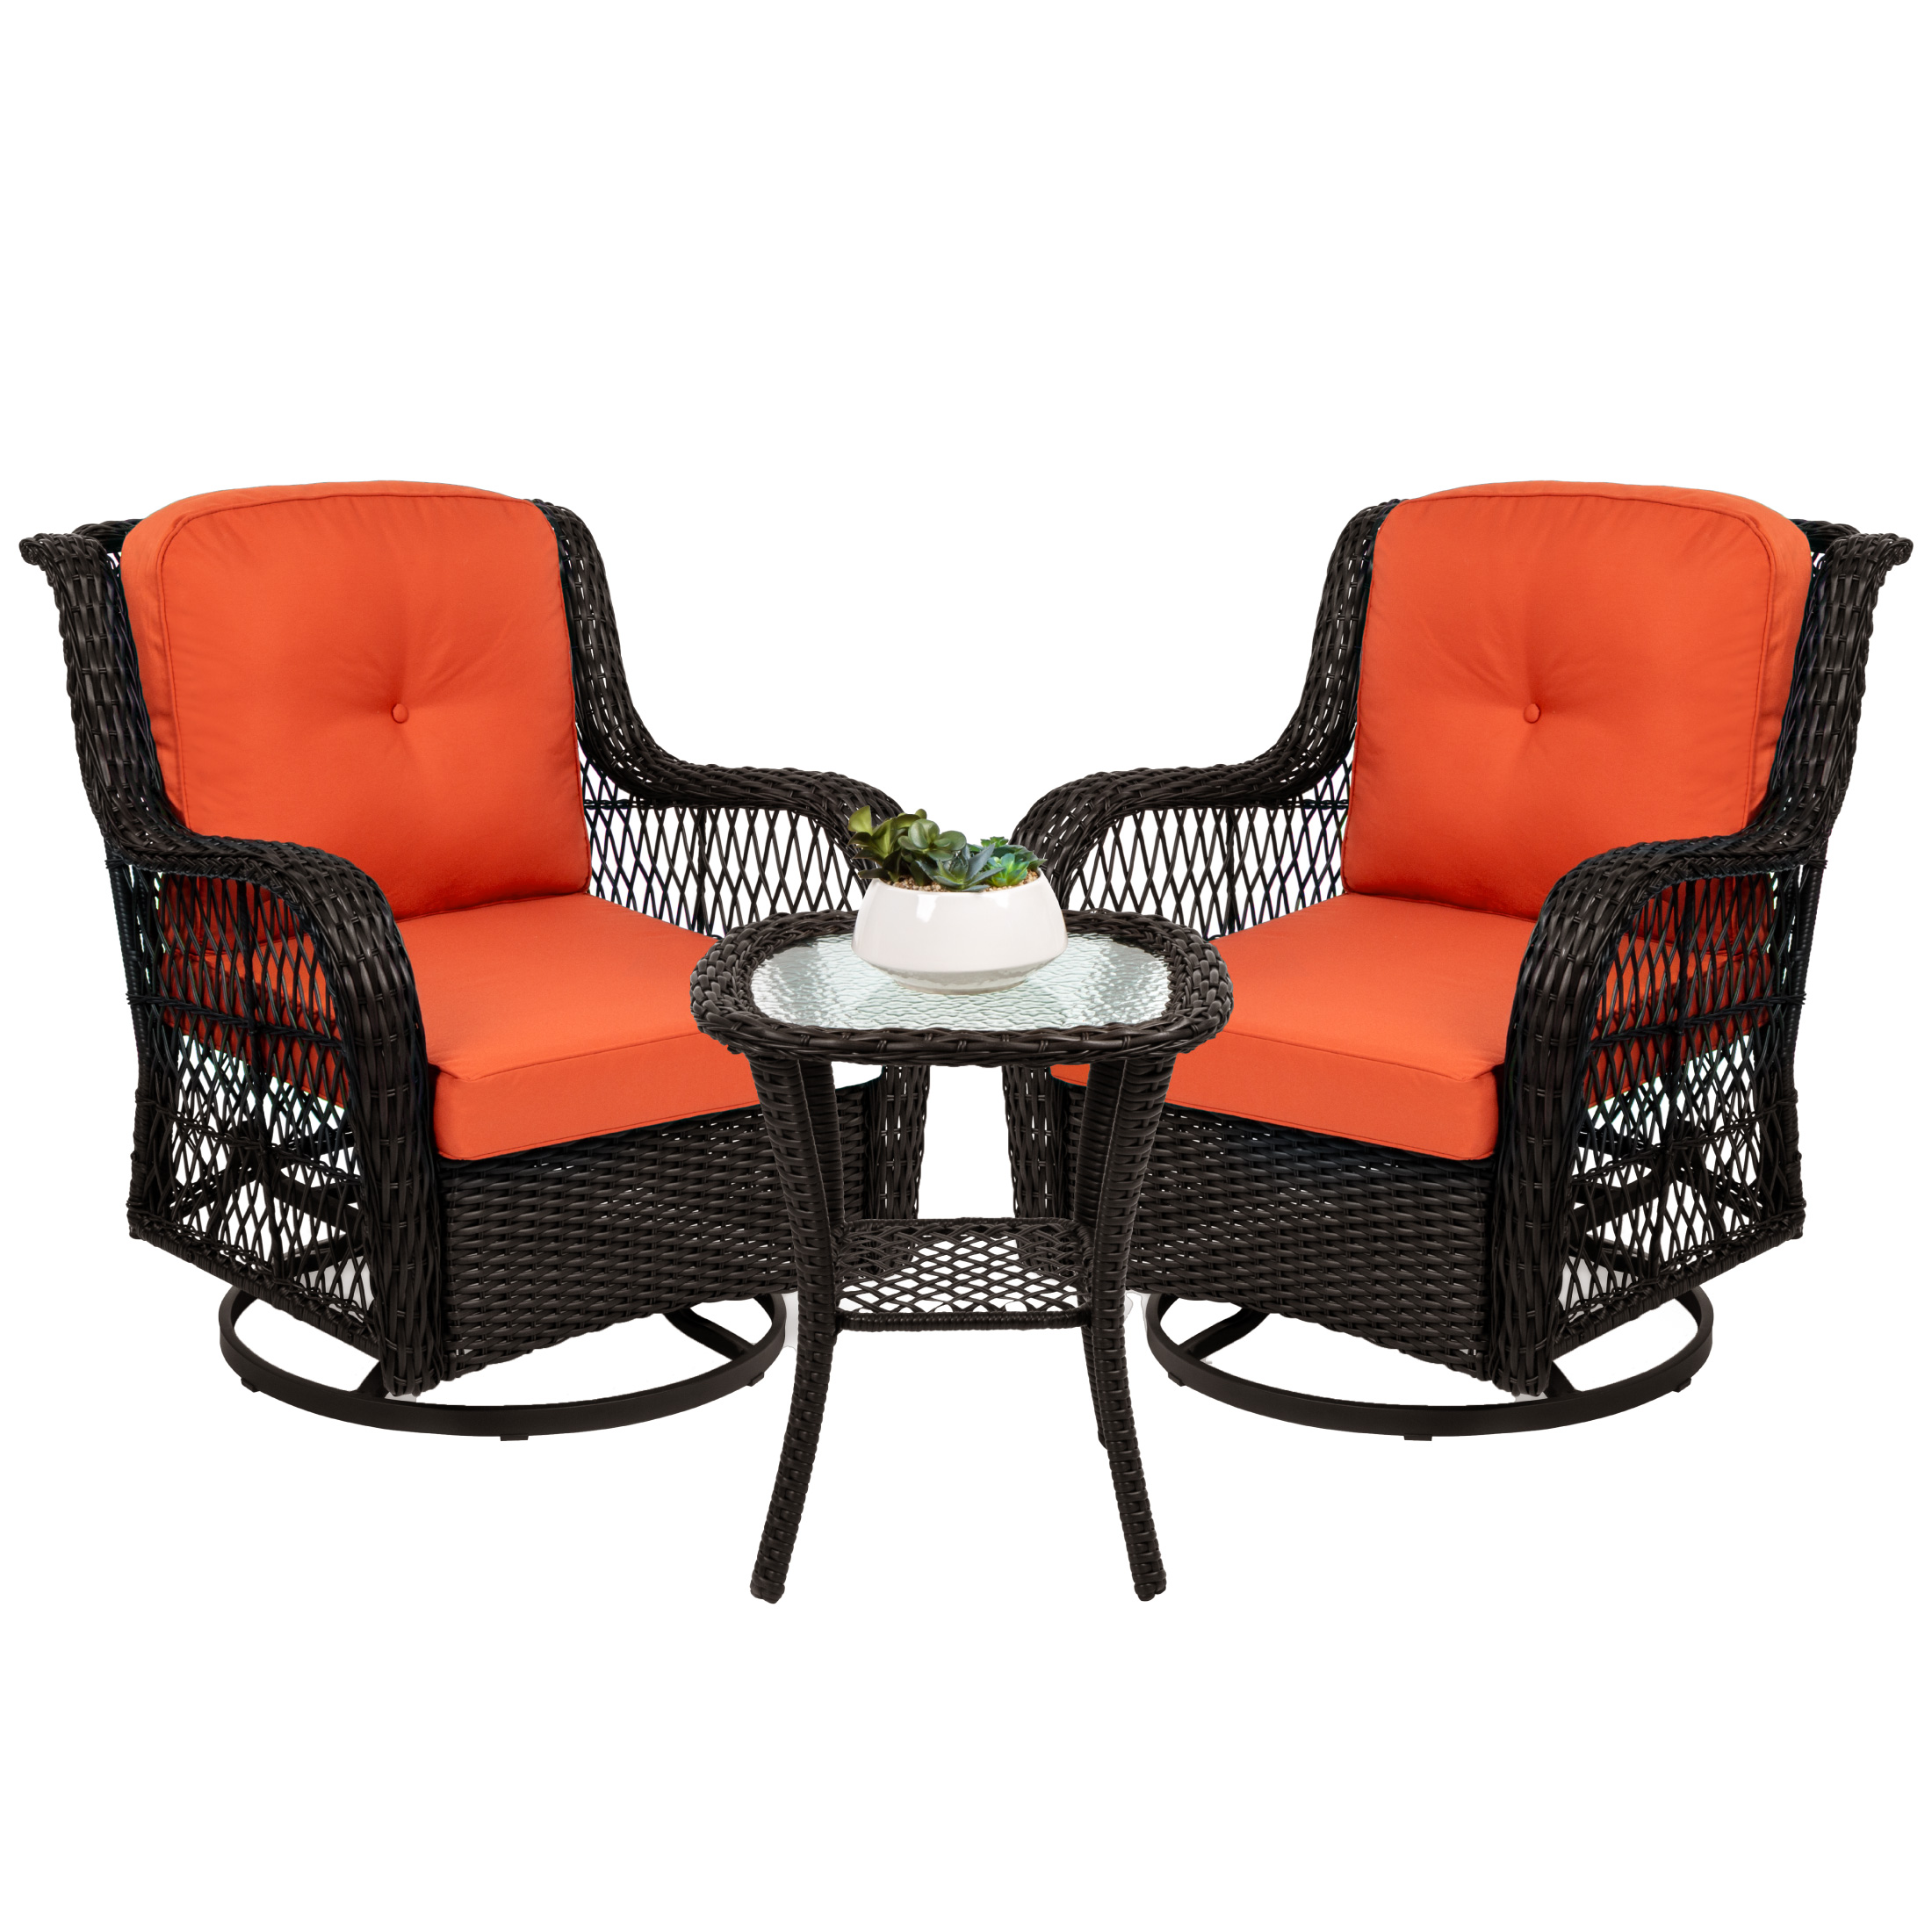 Best Choice Products 3-Piece Patio Wicker Bistro Furniture Set w/ 2 Cushioned Swivel Rocking Chairs, Side Table - Rust - image 1 of 8